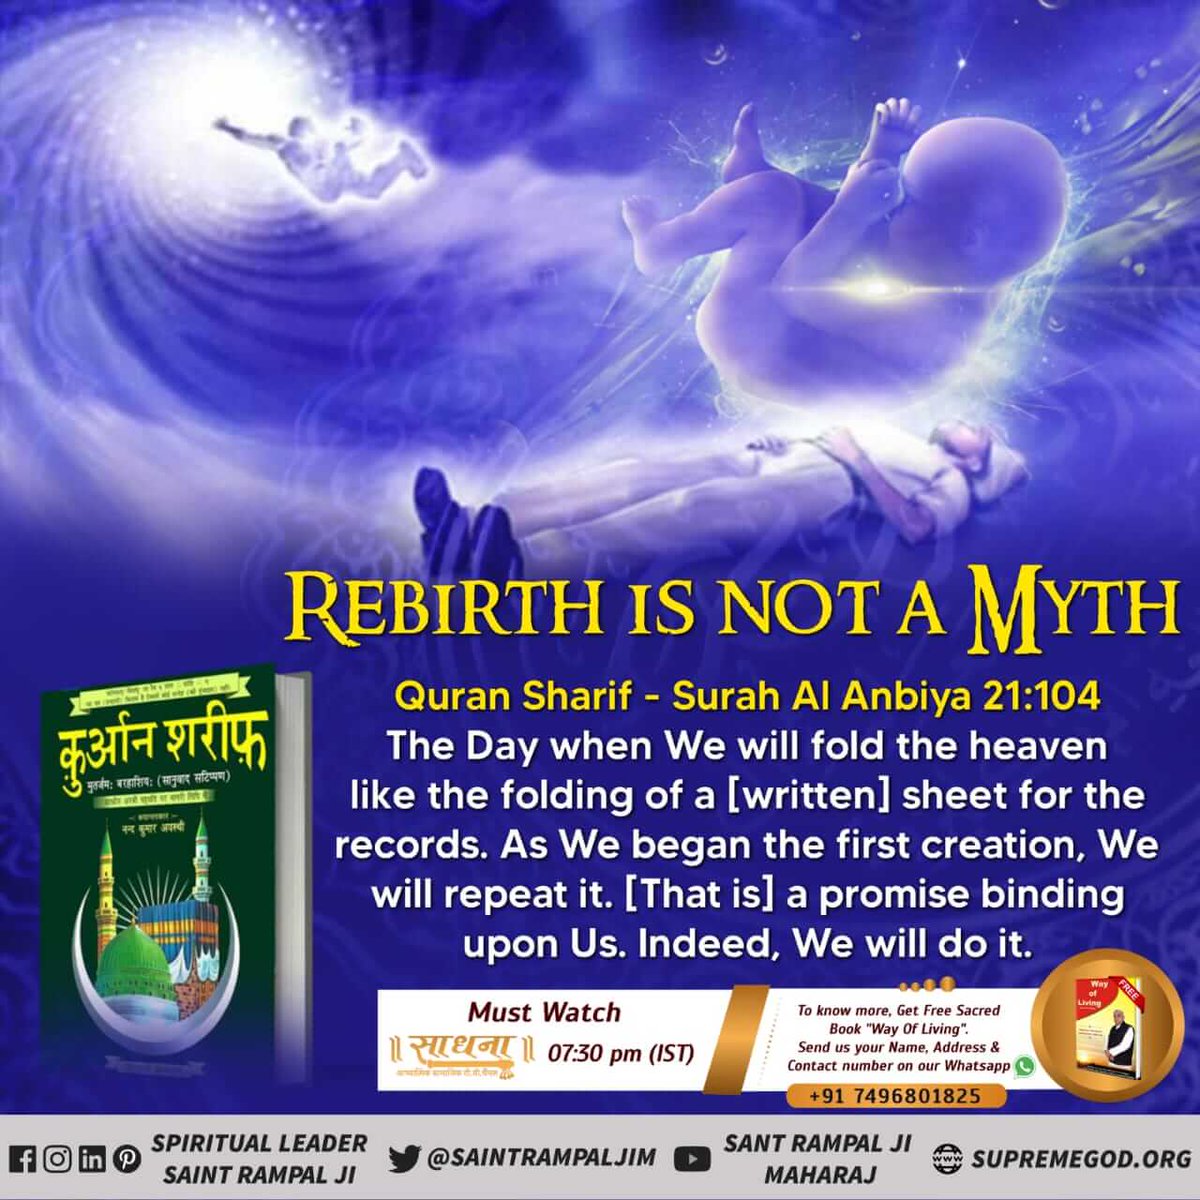 #पुनर्जन्म_का_रहस्य Proof of Rebirth in Islam -: Quran Sharif, Surat Ambiya 21 Verse 104: Just as we created the universe earlier, we will create it again in the same way. The promise is ours, we will definitely do it. That is, reincarnation happens. Rebirth In Islam